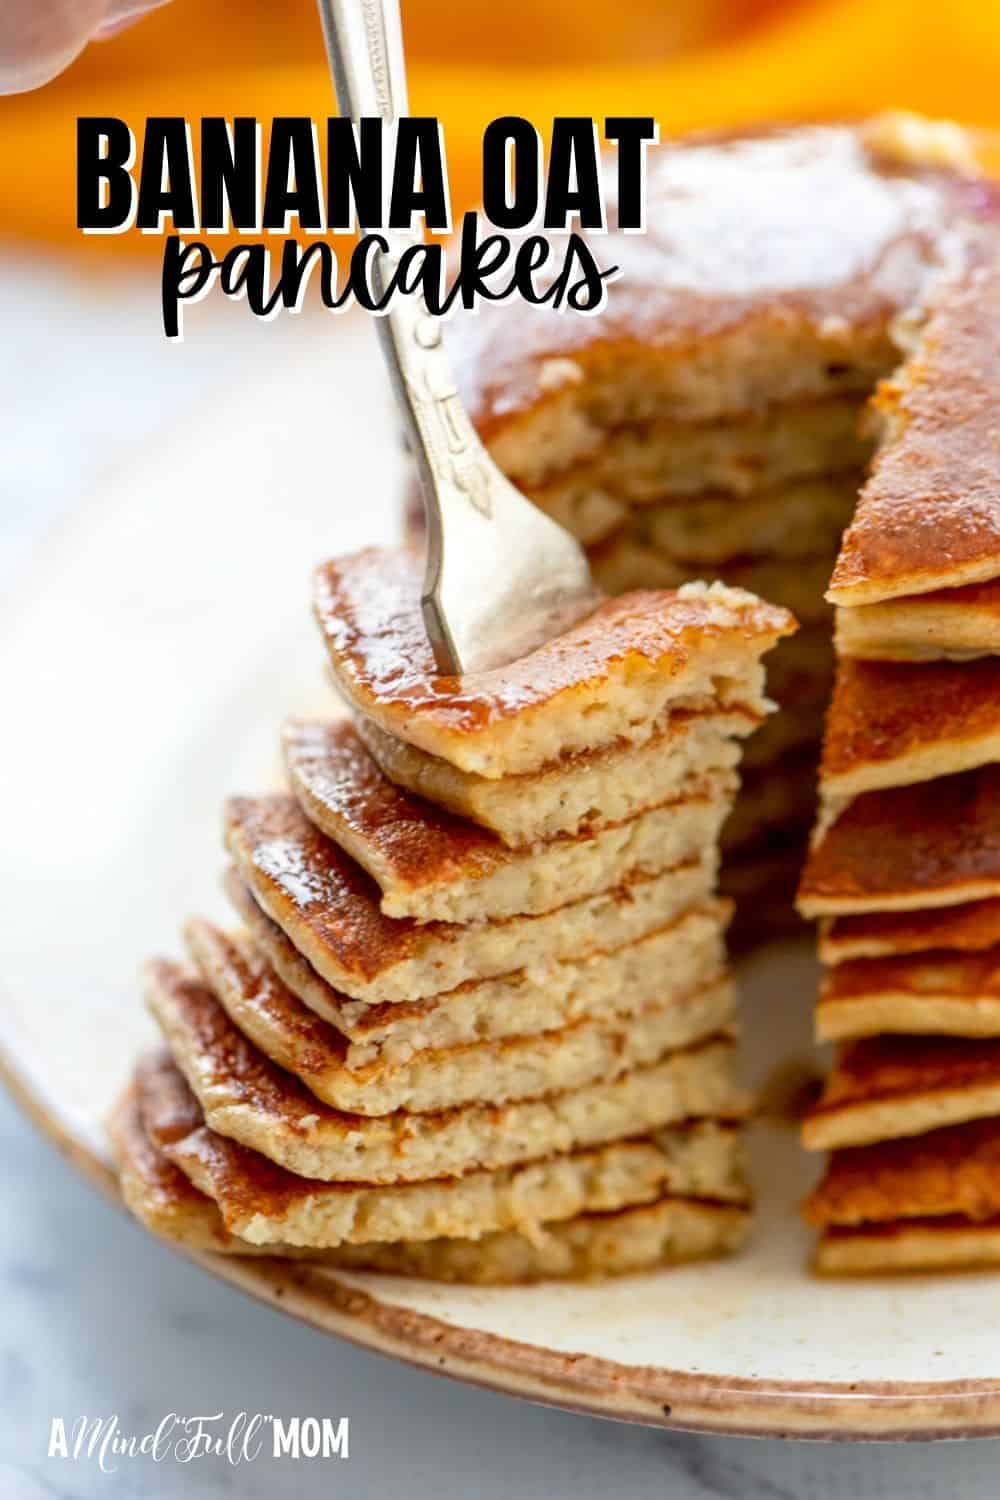 These Healthy Banana Oatmeal Pancakes are easy and delicious! Simple ingredients are blended together to create tender and naturally sweet, gluten-free pancakes.